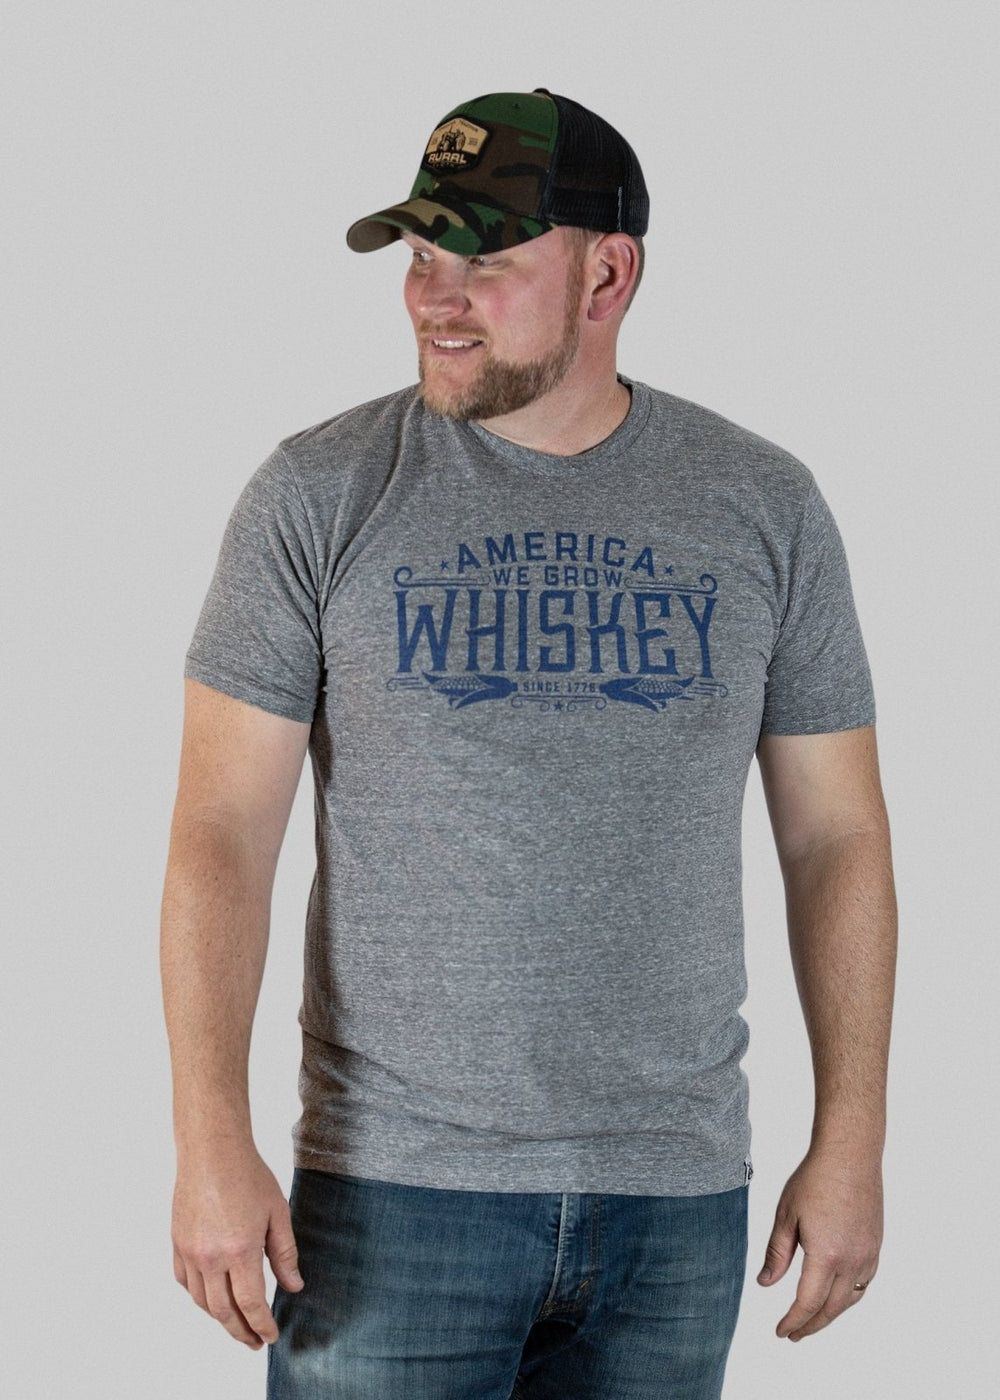 A man wearing a Rural Cloth "America We Grow Whiskey" Tee in gray and a camo baseball cap stands against a light gray background. The whiskey shirt pairs well with his faded blue jeans, reflecting that classic, made-in-USA style. He has a trimmed beard and looks to his right.